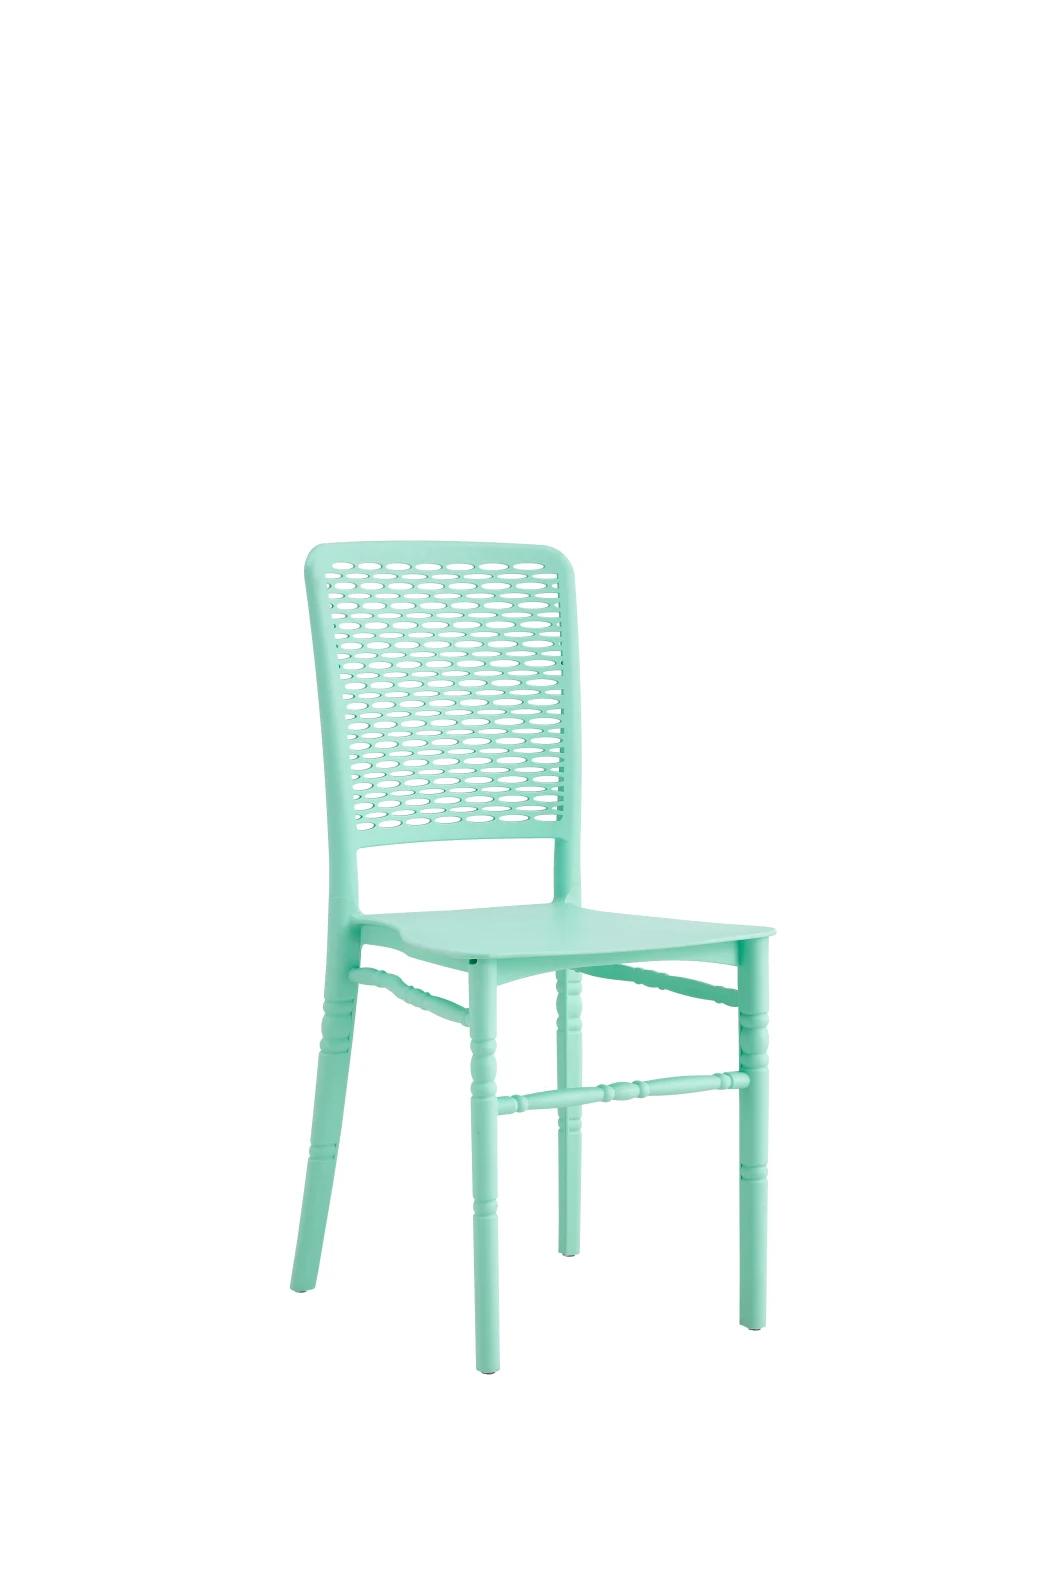 The Best Raw Material Flower Shaped Design Dining Plastic Chair